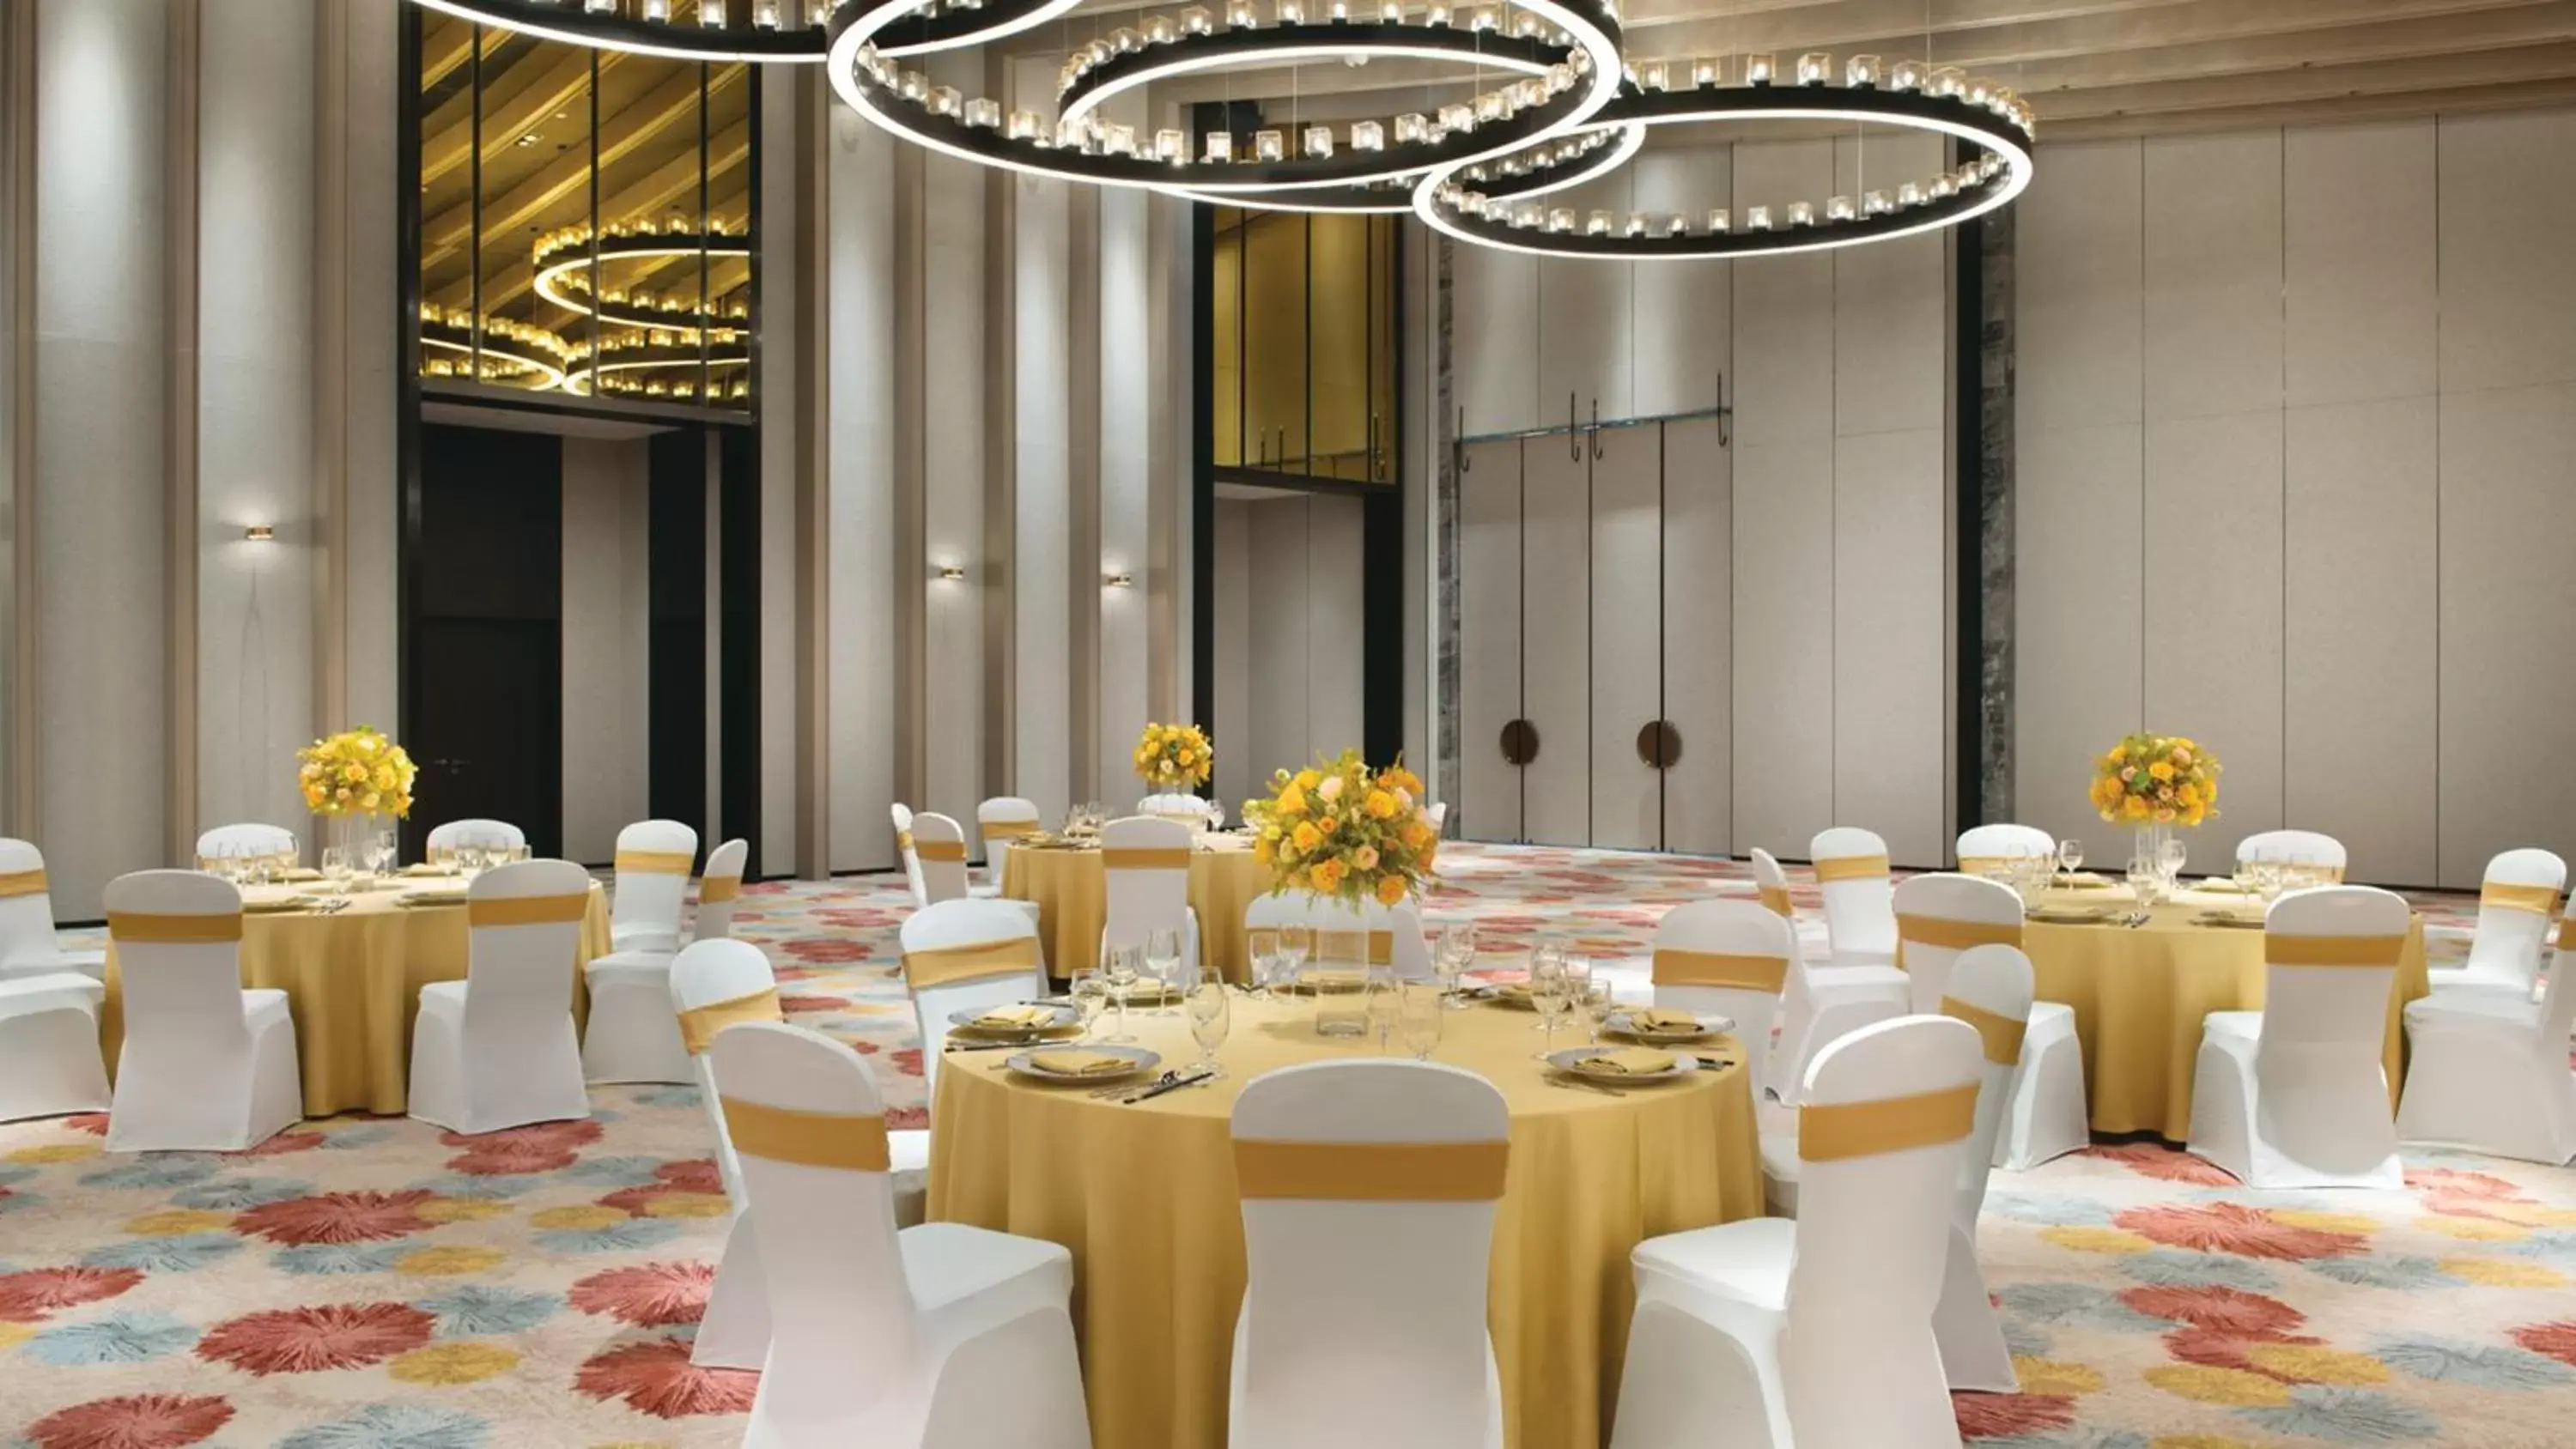 Banquet/Function facilities, Banquet Facilities in Crowne Plaza Quanzhou Riverview, an IHG Hotel